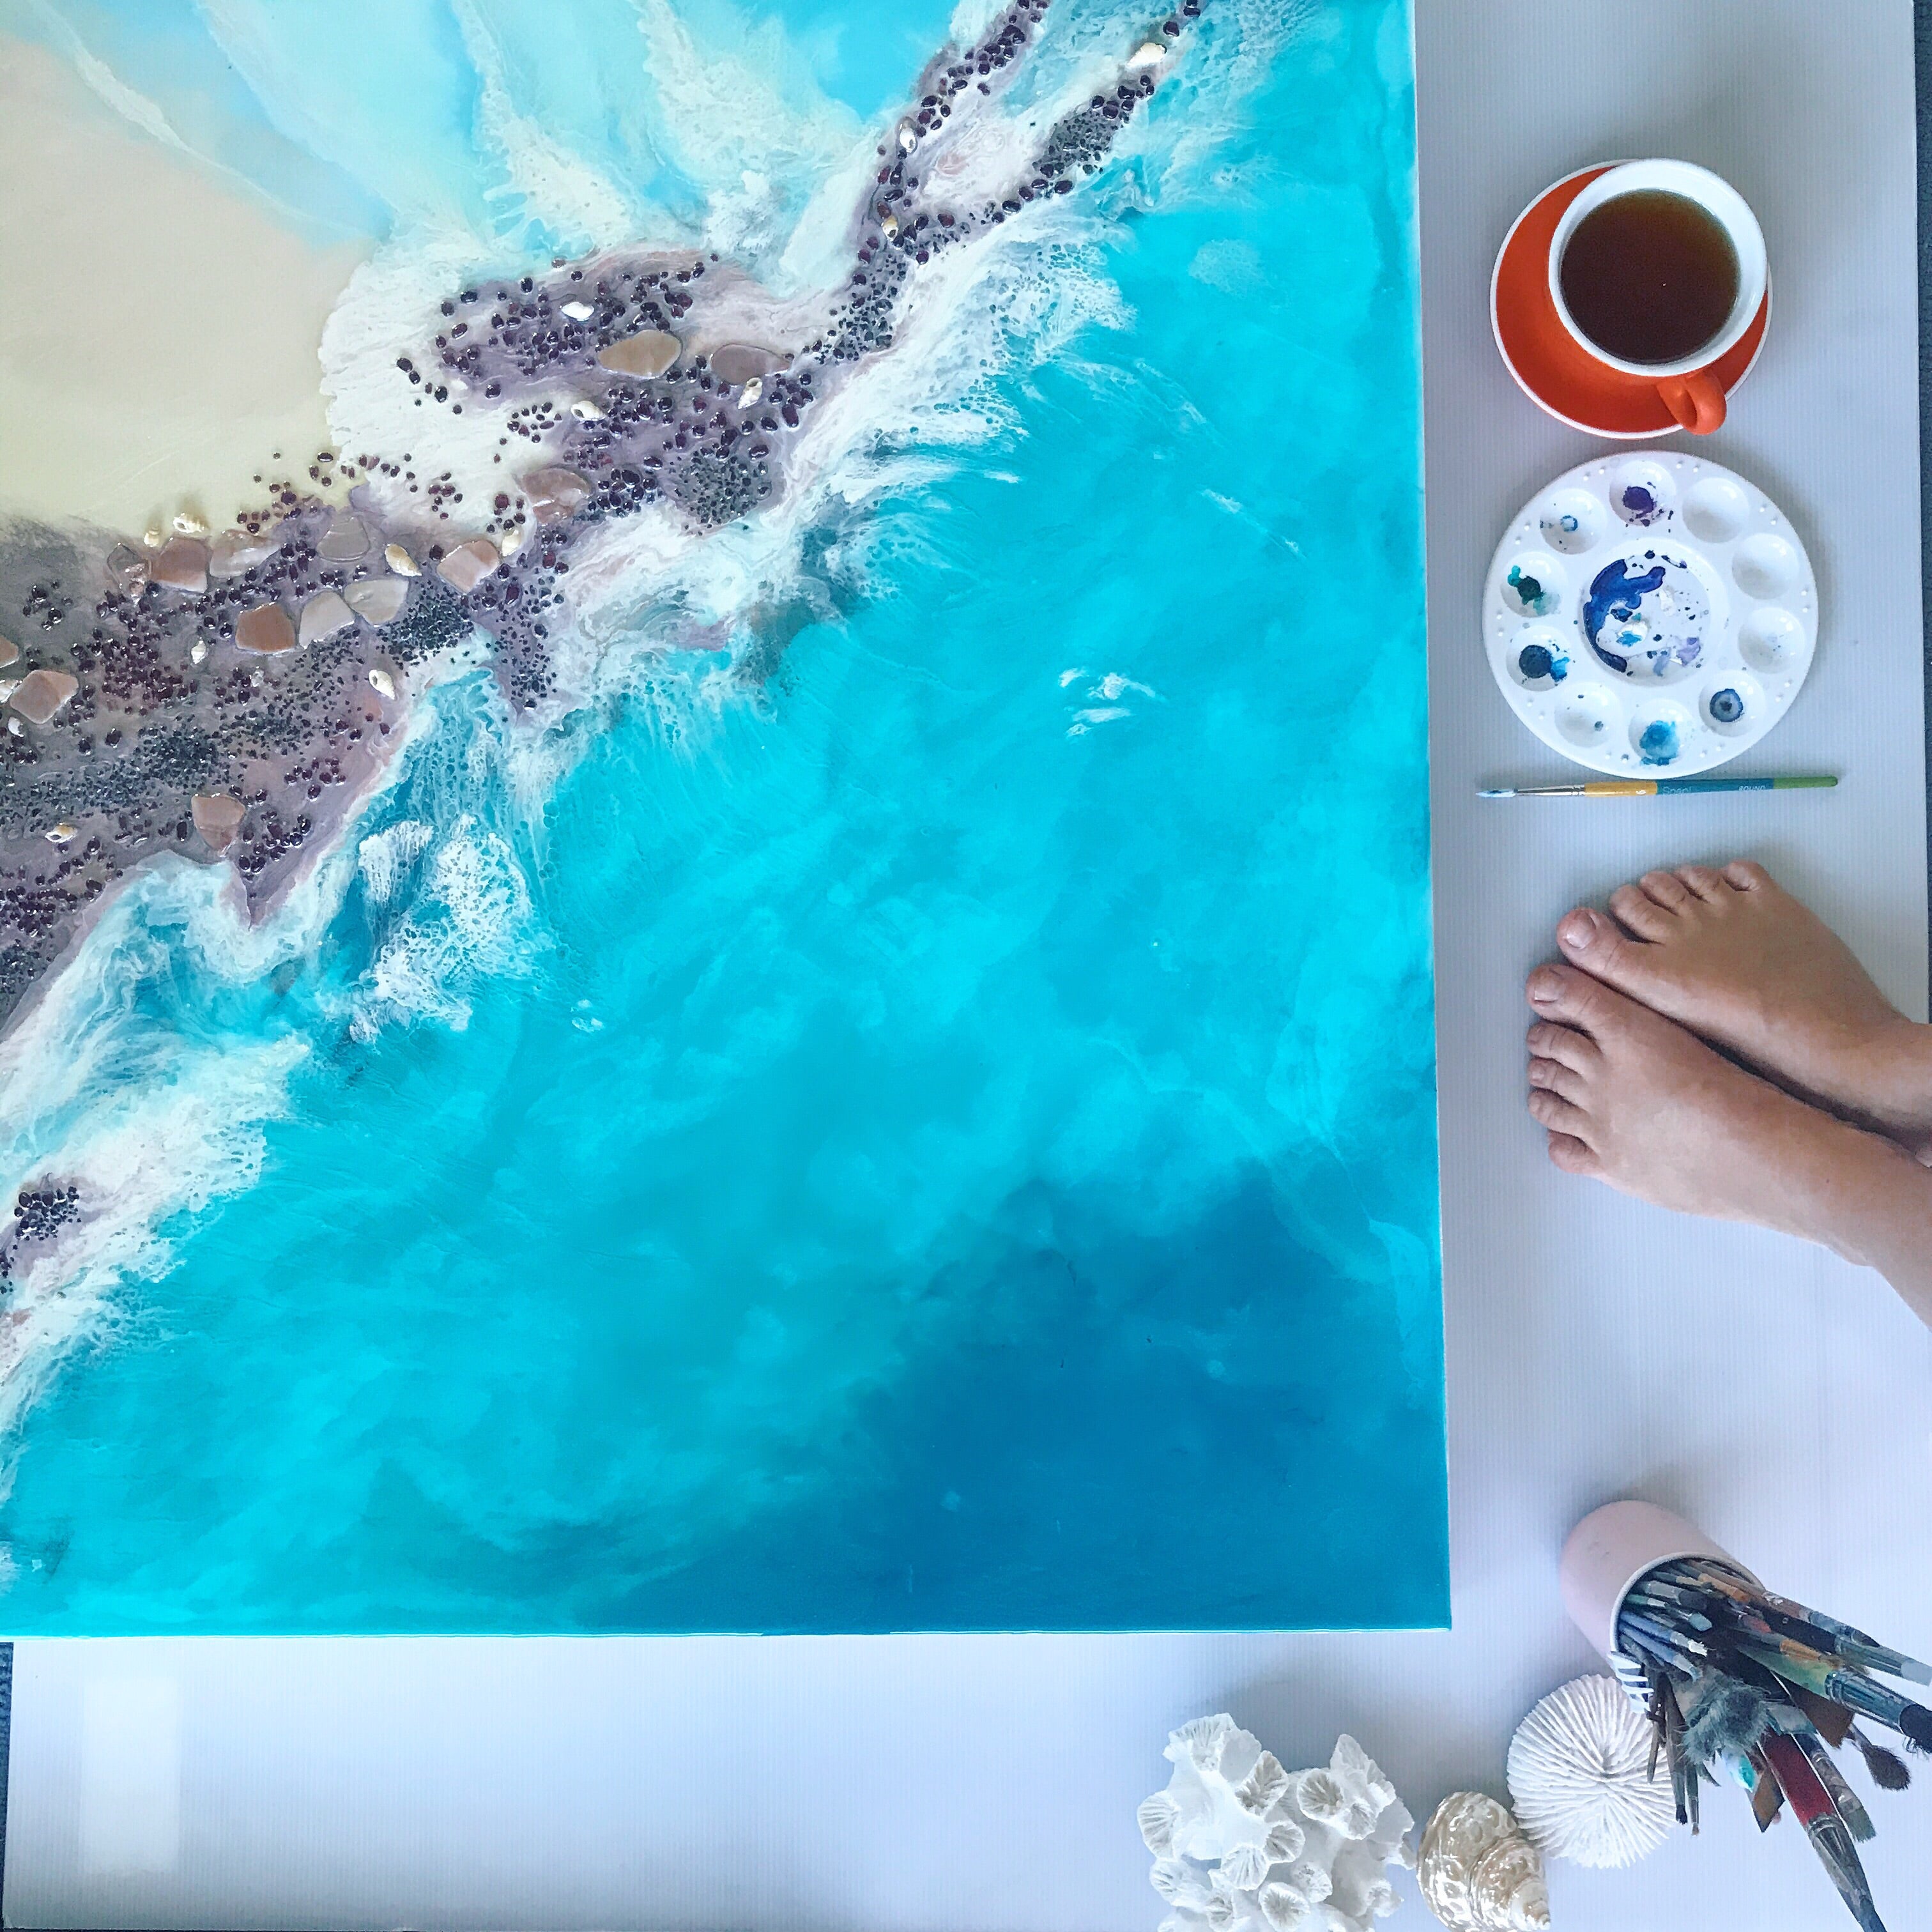 Teal Blue Ocean Wave. Byron Bay Magic. Original Artwork. Antuanelle 6 Magic with Mussels and Garnet. Abstract Seascape 90x90cm